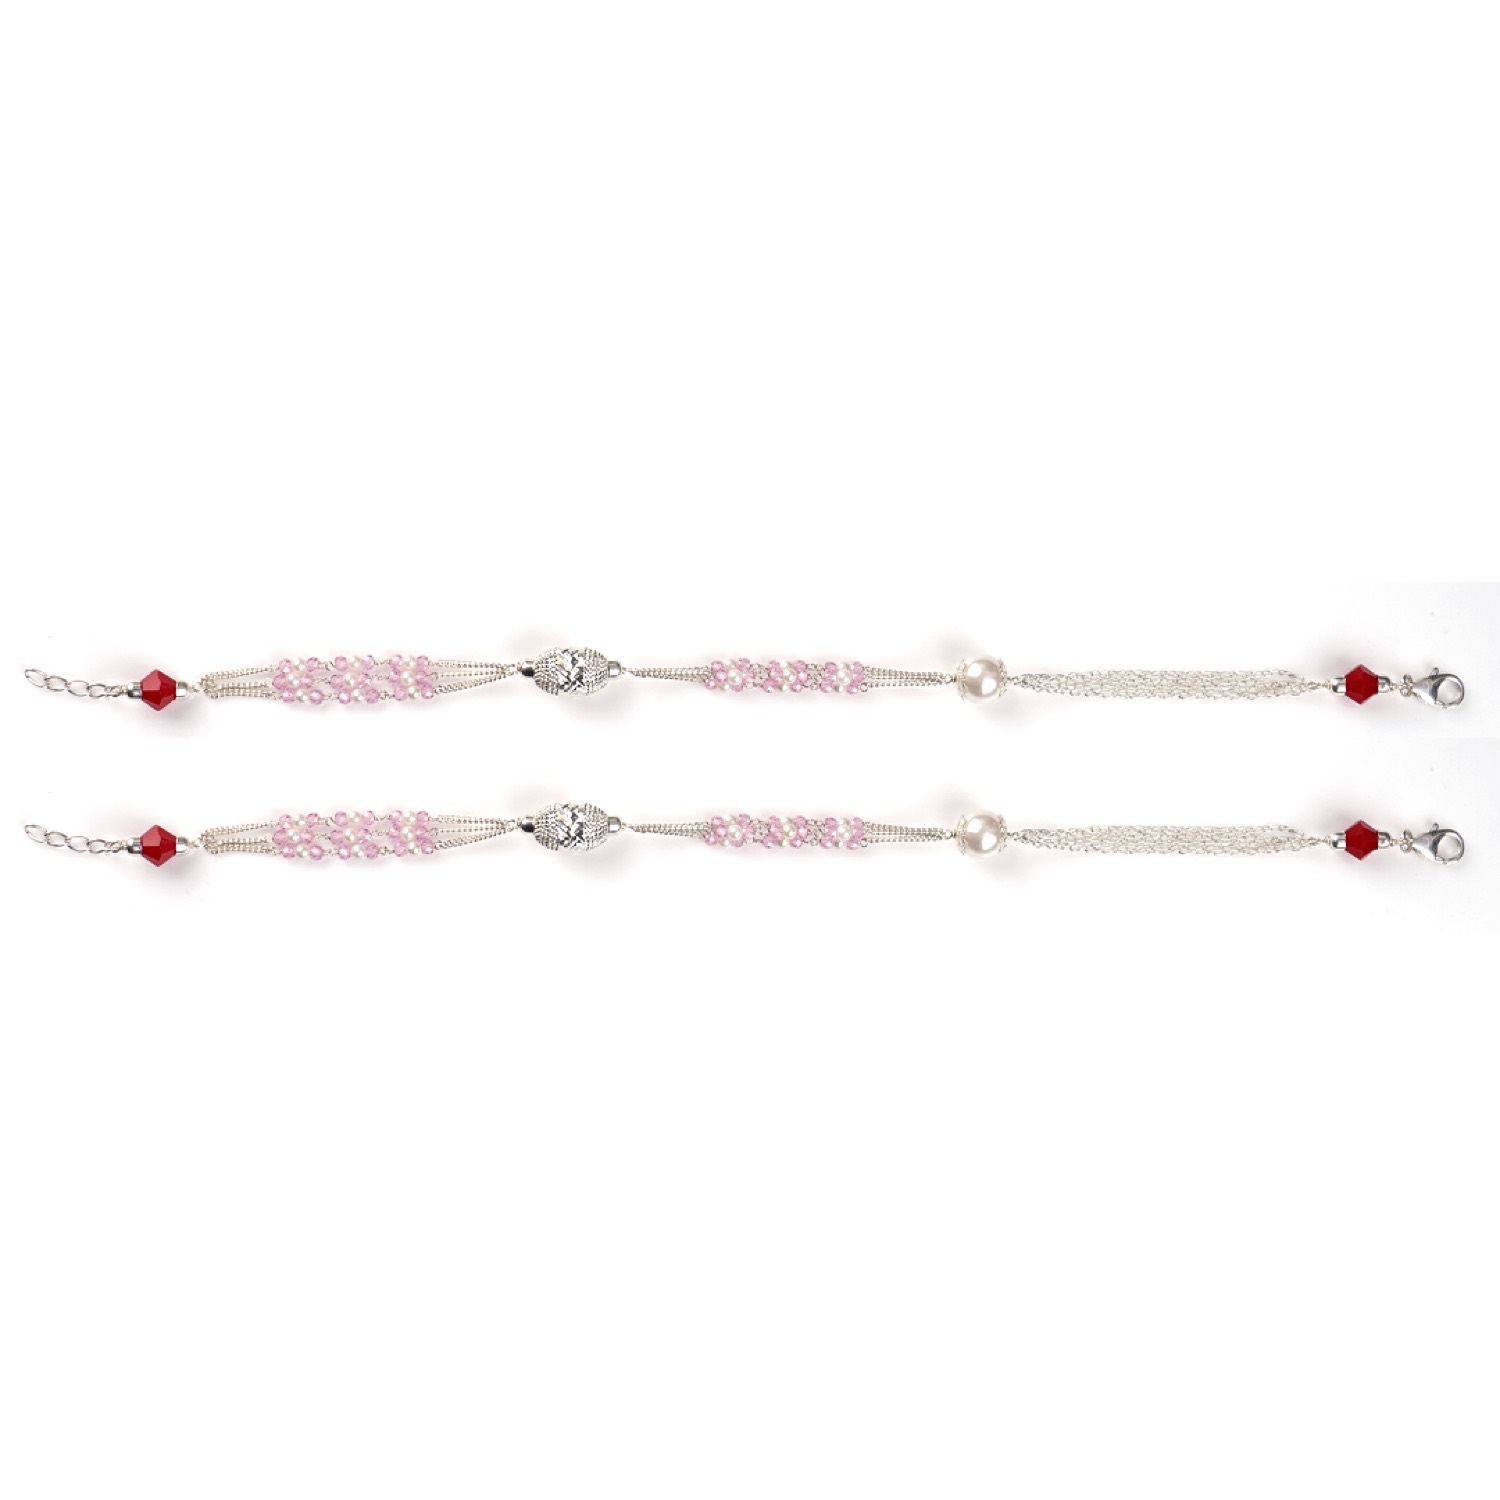 varam_anklets_072022_red_and_baby_pink_stone_silver_anklets_2-1